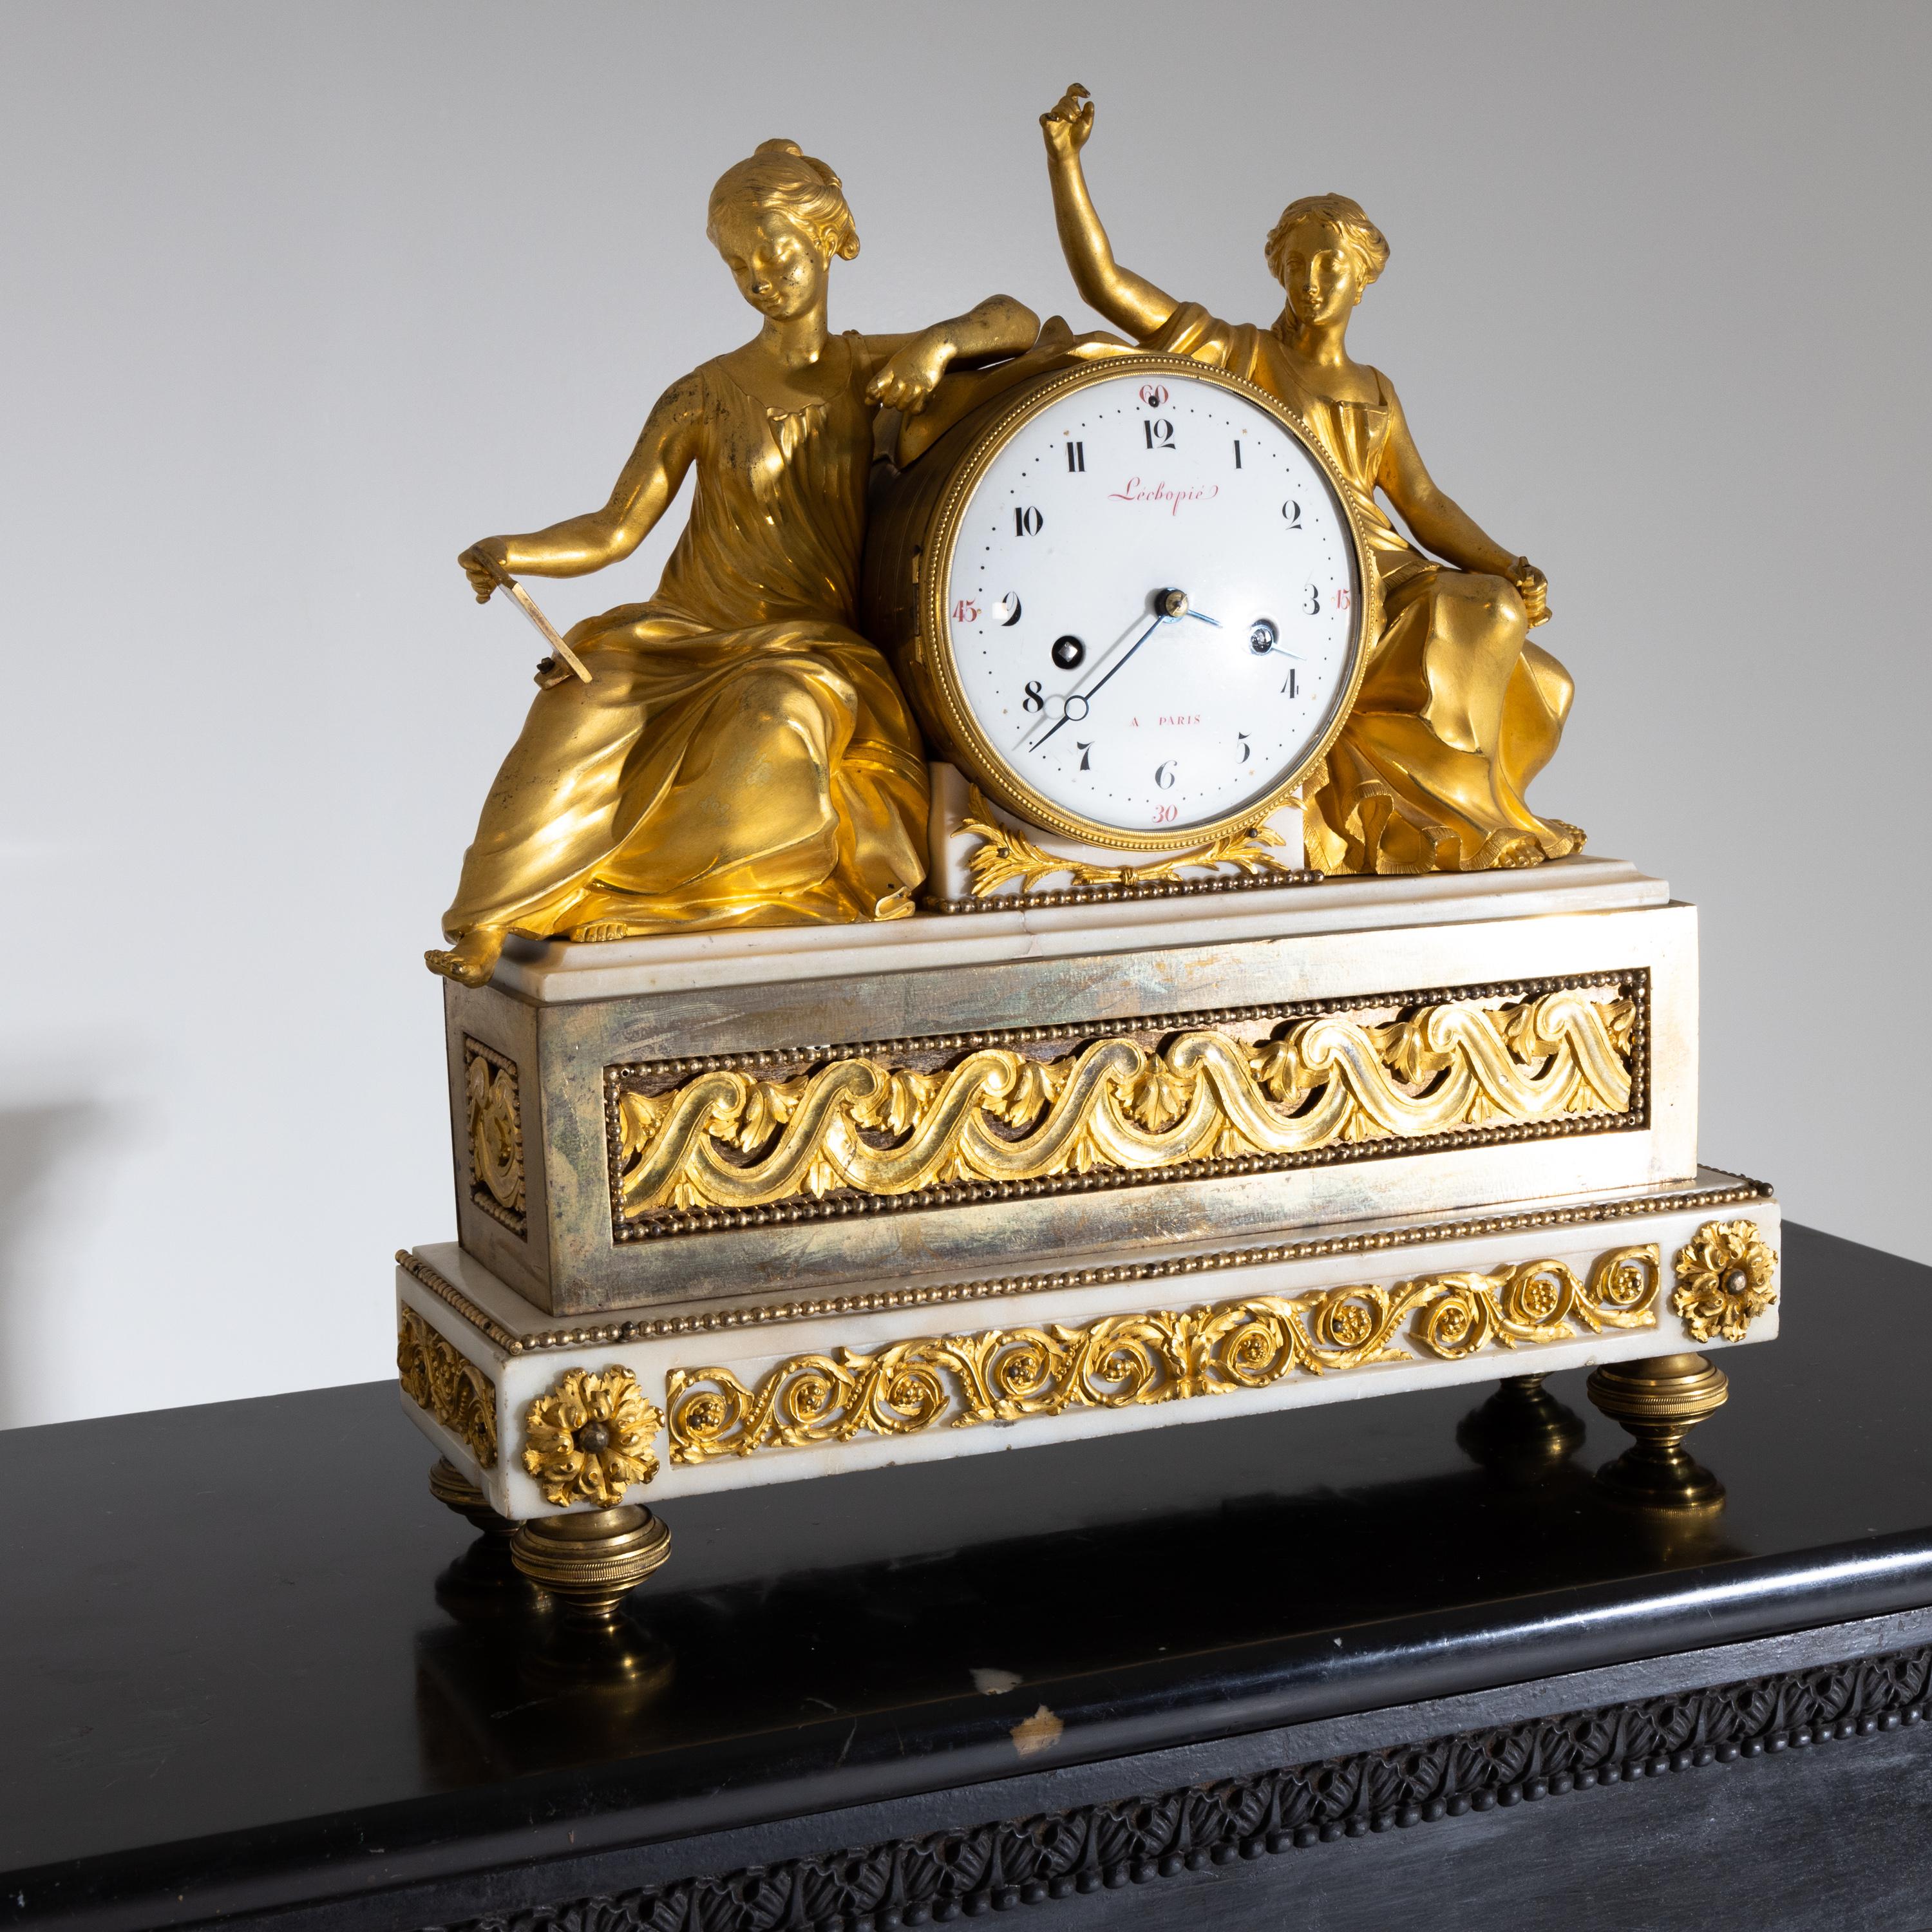 Louis XVI Pendule Clock “Studying the Tablets of the Law”, France, Paris, circa 1770-1780